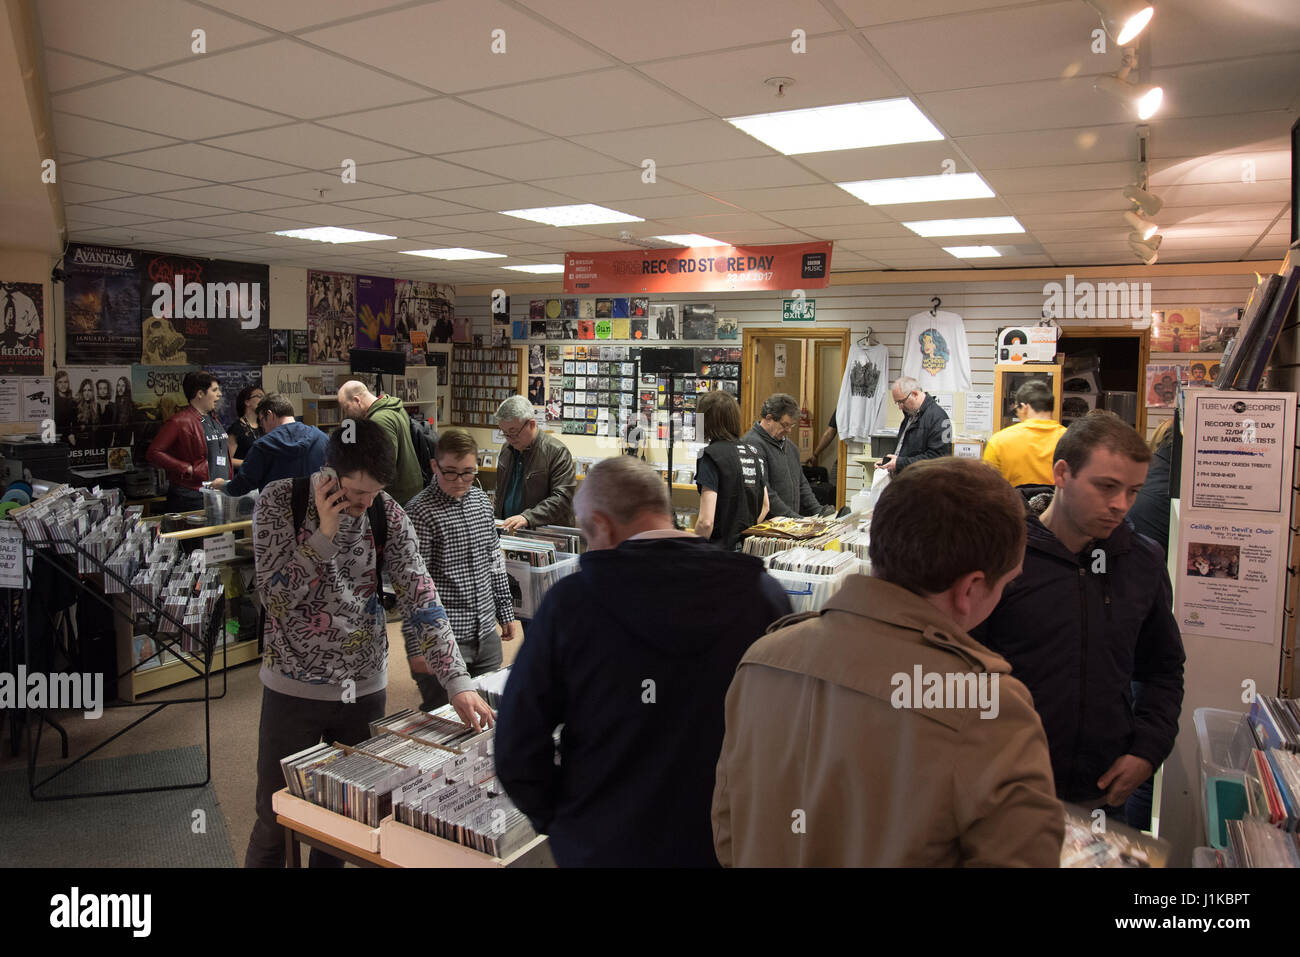 Shrewsbury, Shropshire, UK. 22nd April 2017. Inside Tubeway Records, one of three independent vinyl record shops in Shrewsbury, Shropshire that opened their doors for the 10th Record Store Day Credit: Richard Franklin/Alamy Live News Stock Photo